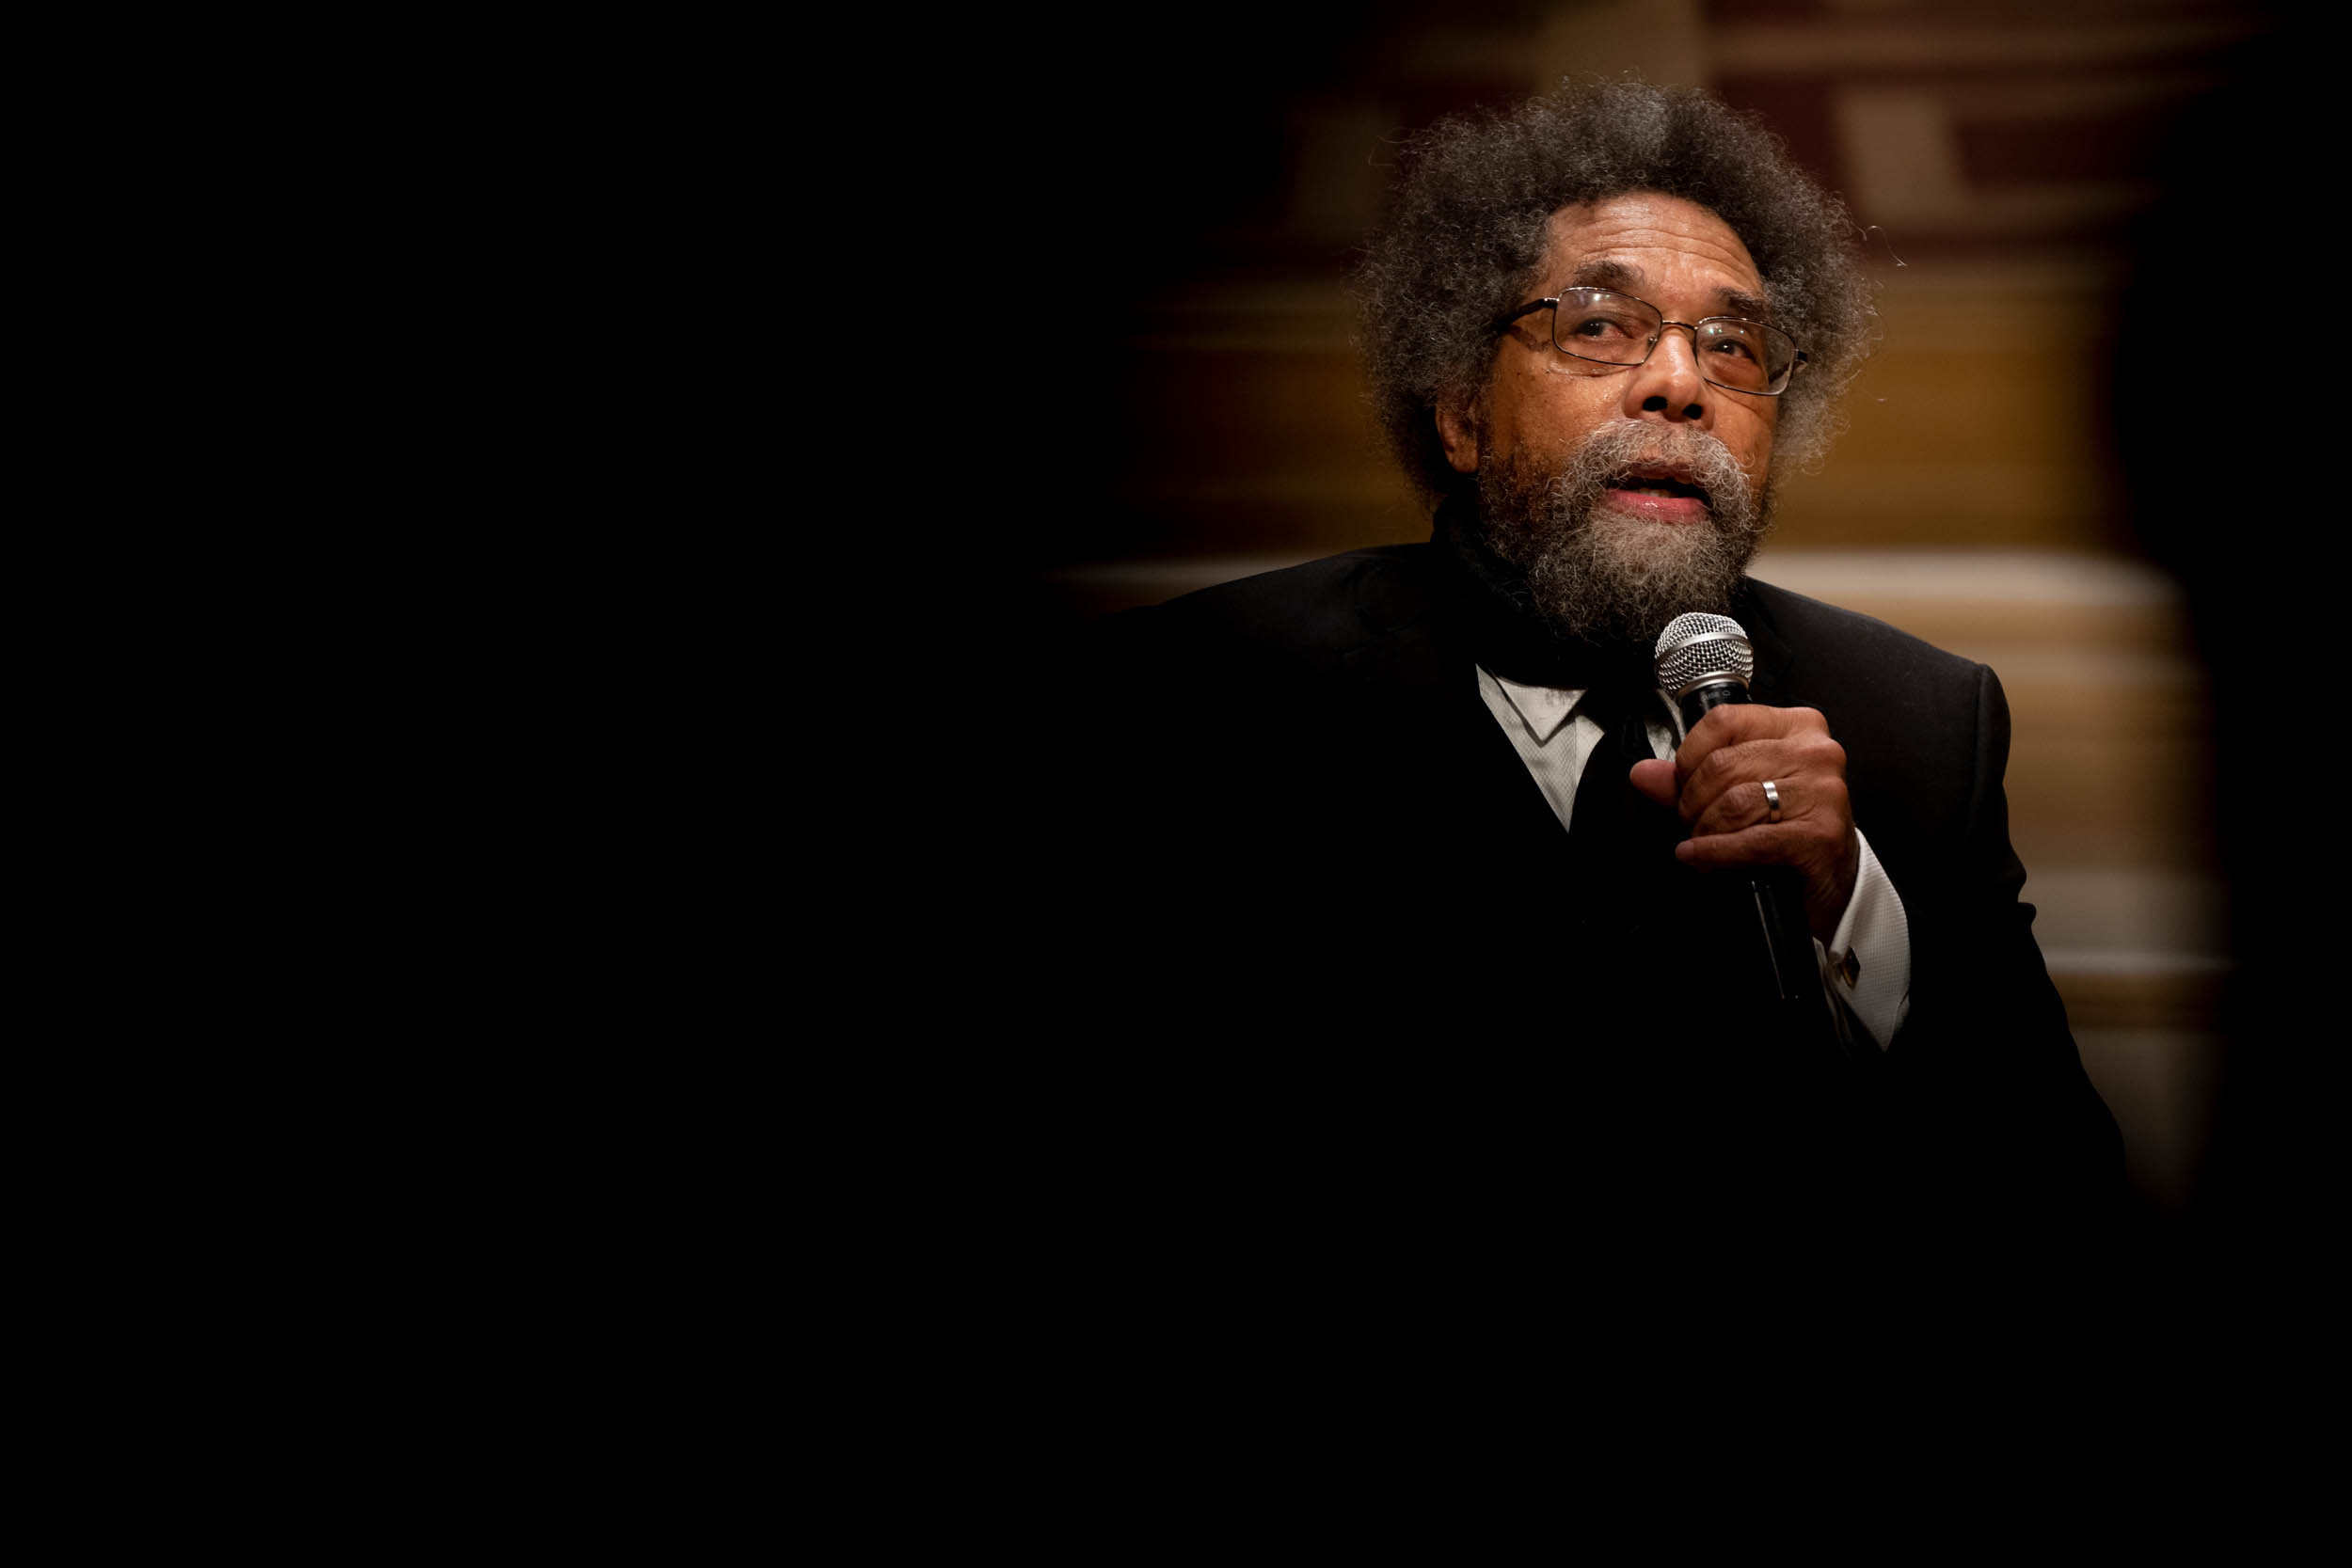 Cornel West speaking into a microphone with most of the image dark except for him